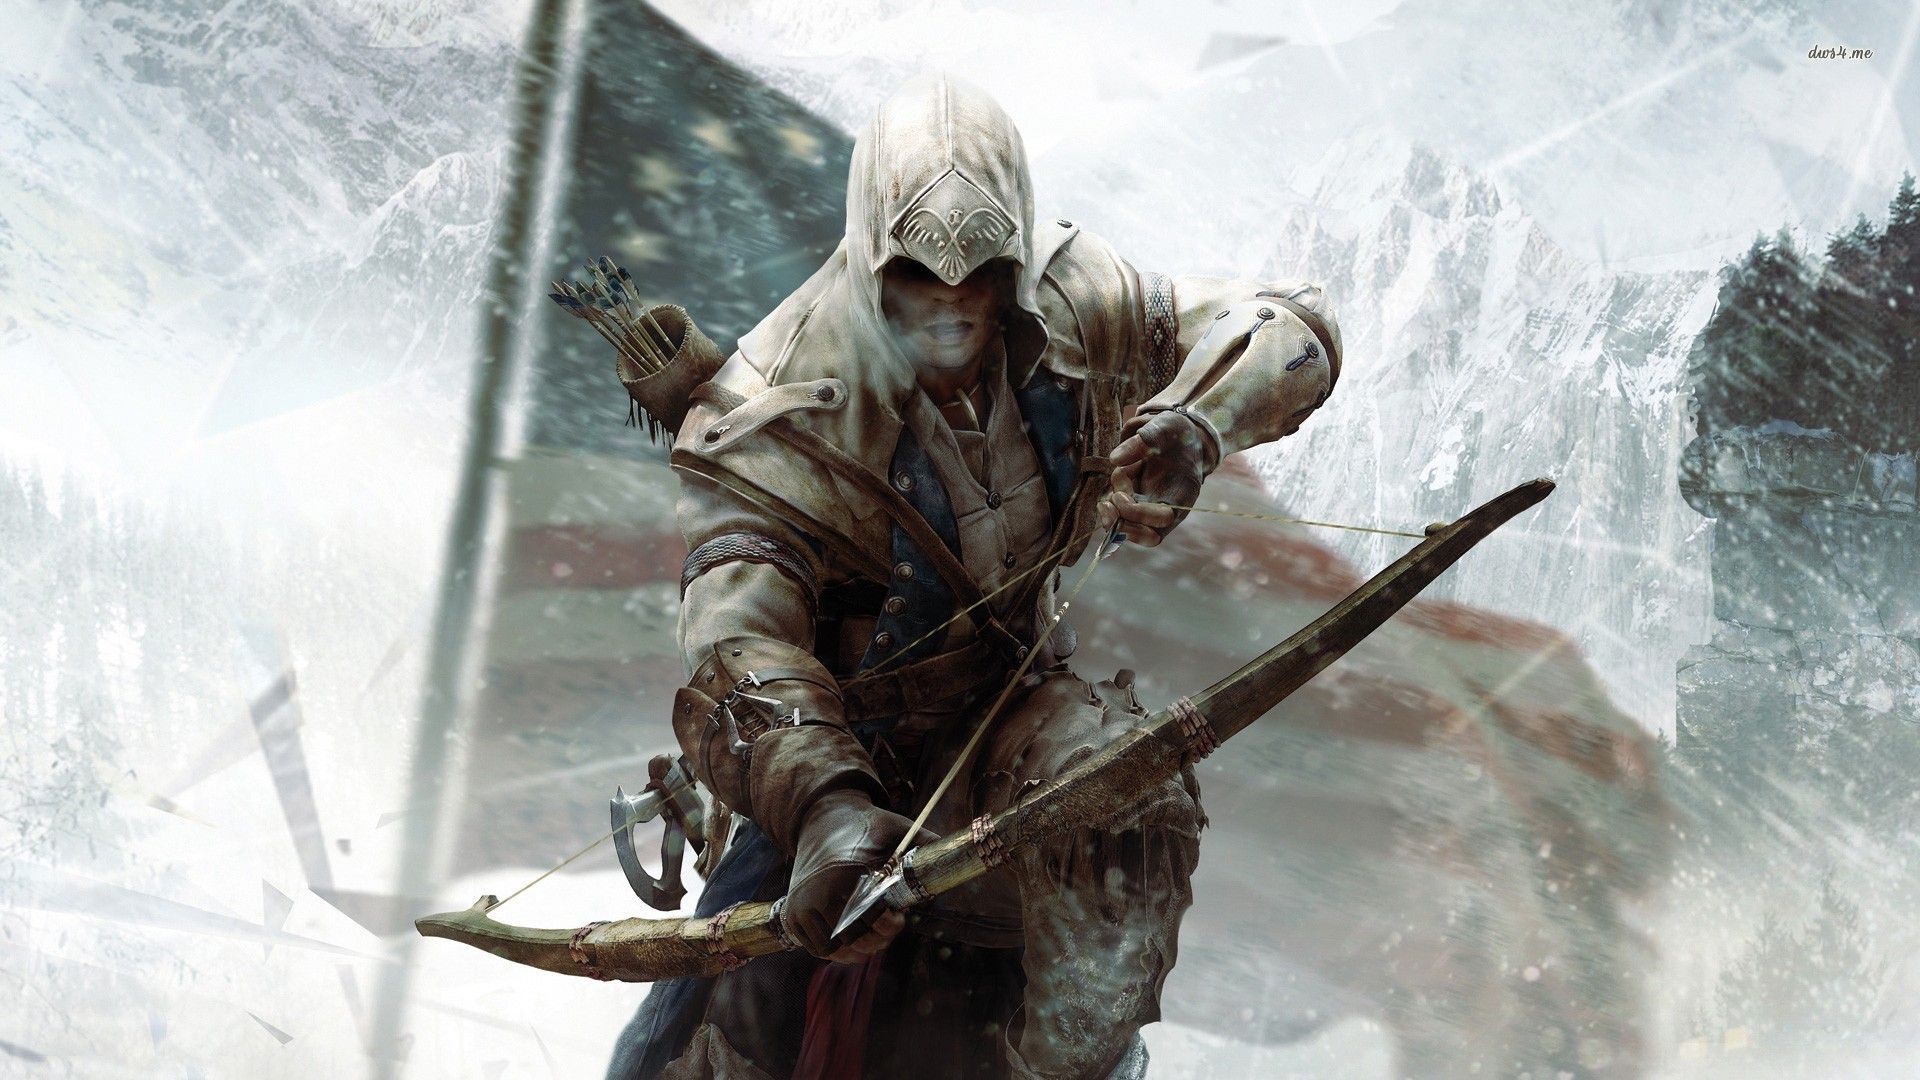 Assassin's Creed III Background. Assassin's Creed Wallpaper, Assasins Creed Black Wallpaper and Assassin's Creed Background